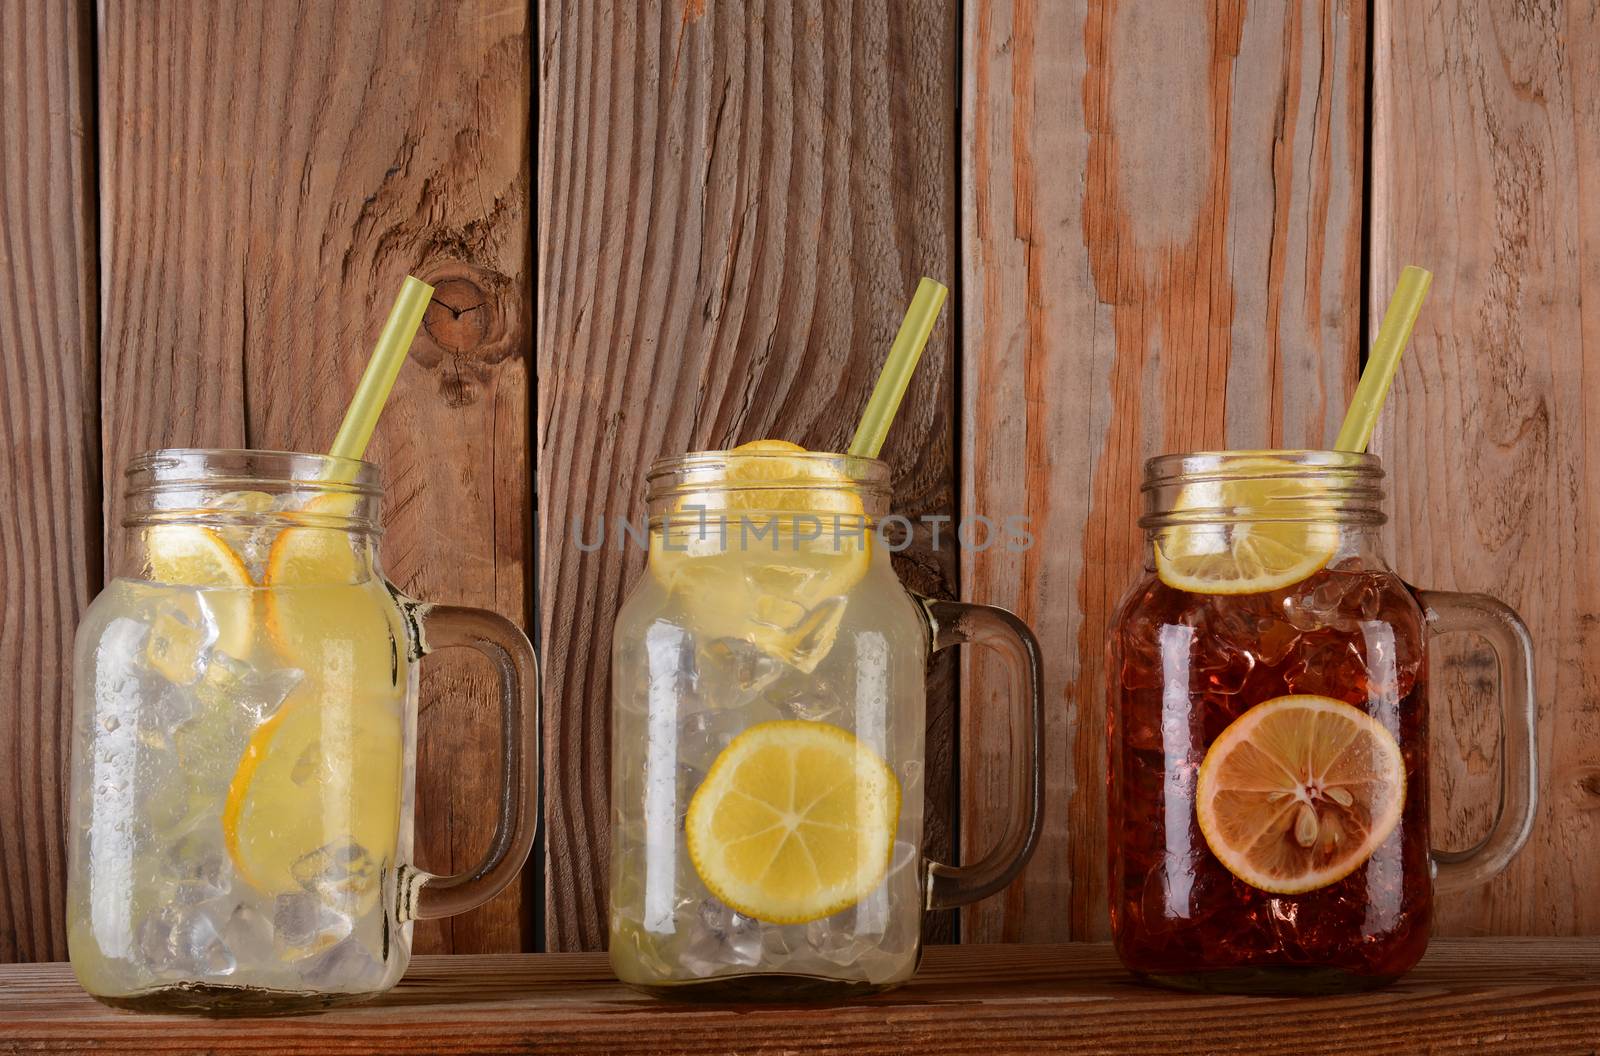 Glasses of lemonade and fruit Juice on a rustic kitchen ledge. The mason jar style glasses have handles and drinking straws. 